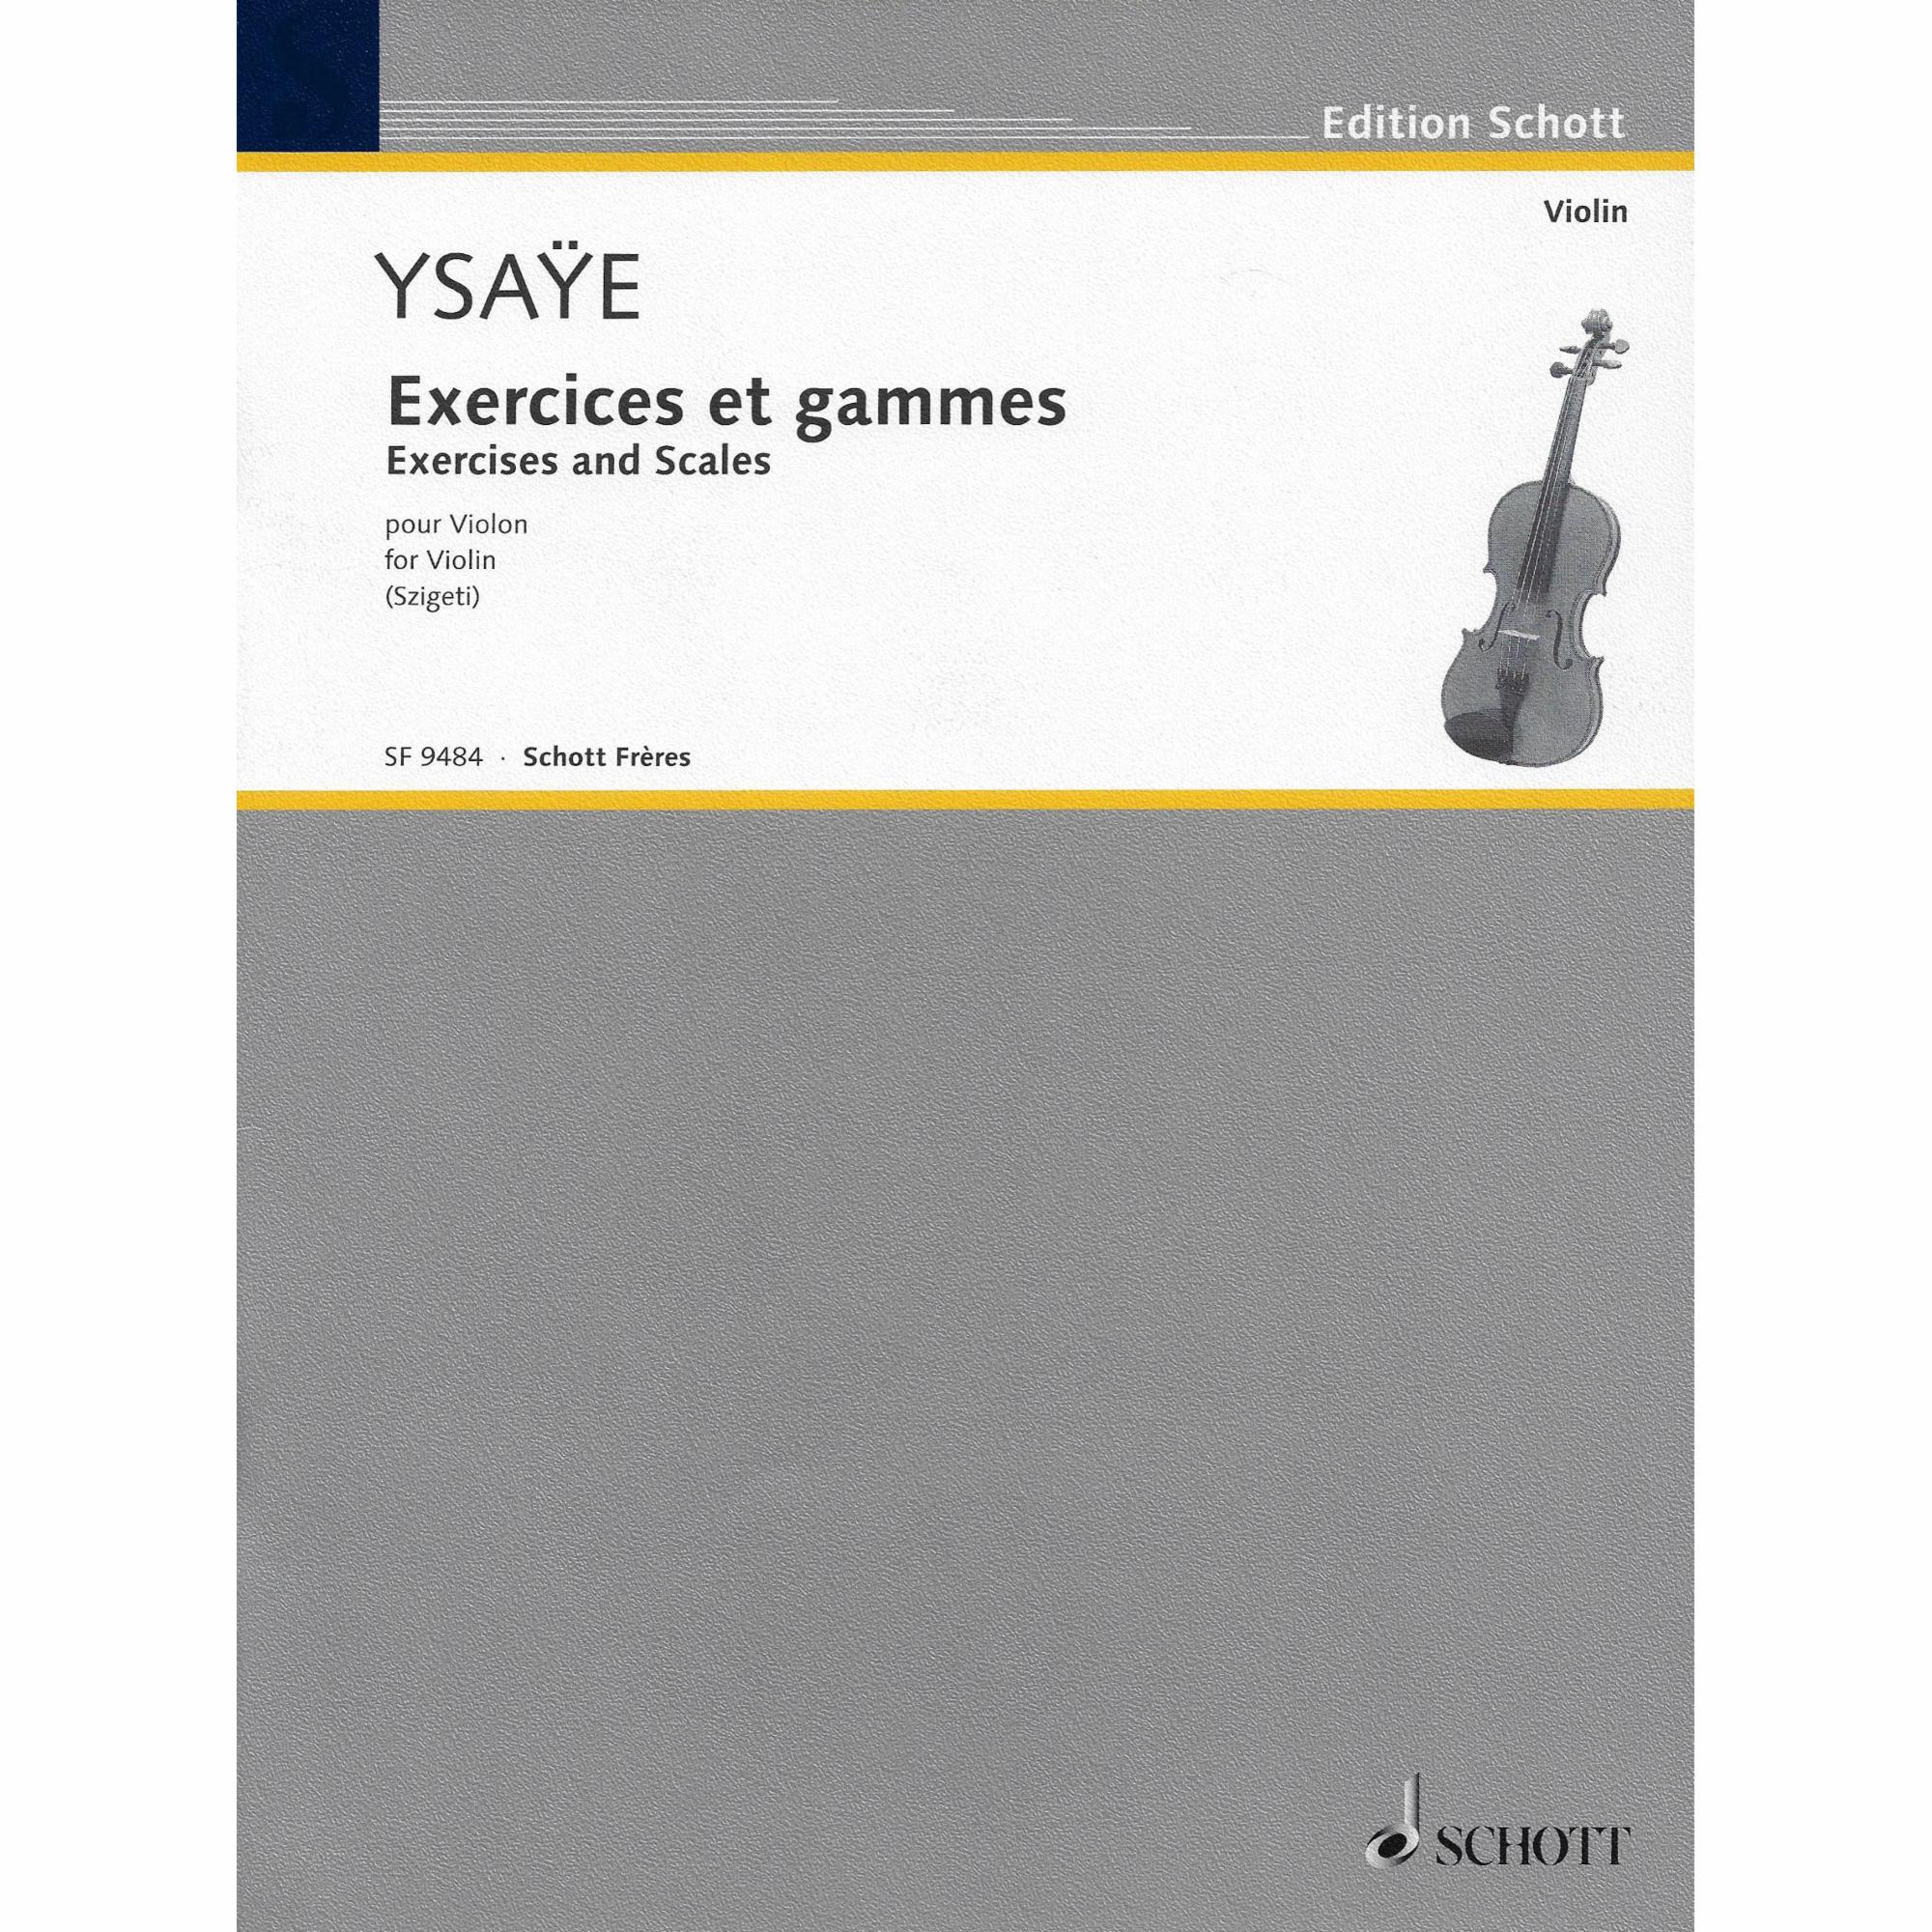 Ysaye -- Exercises and Scales for Violin